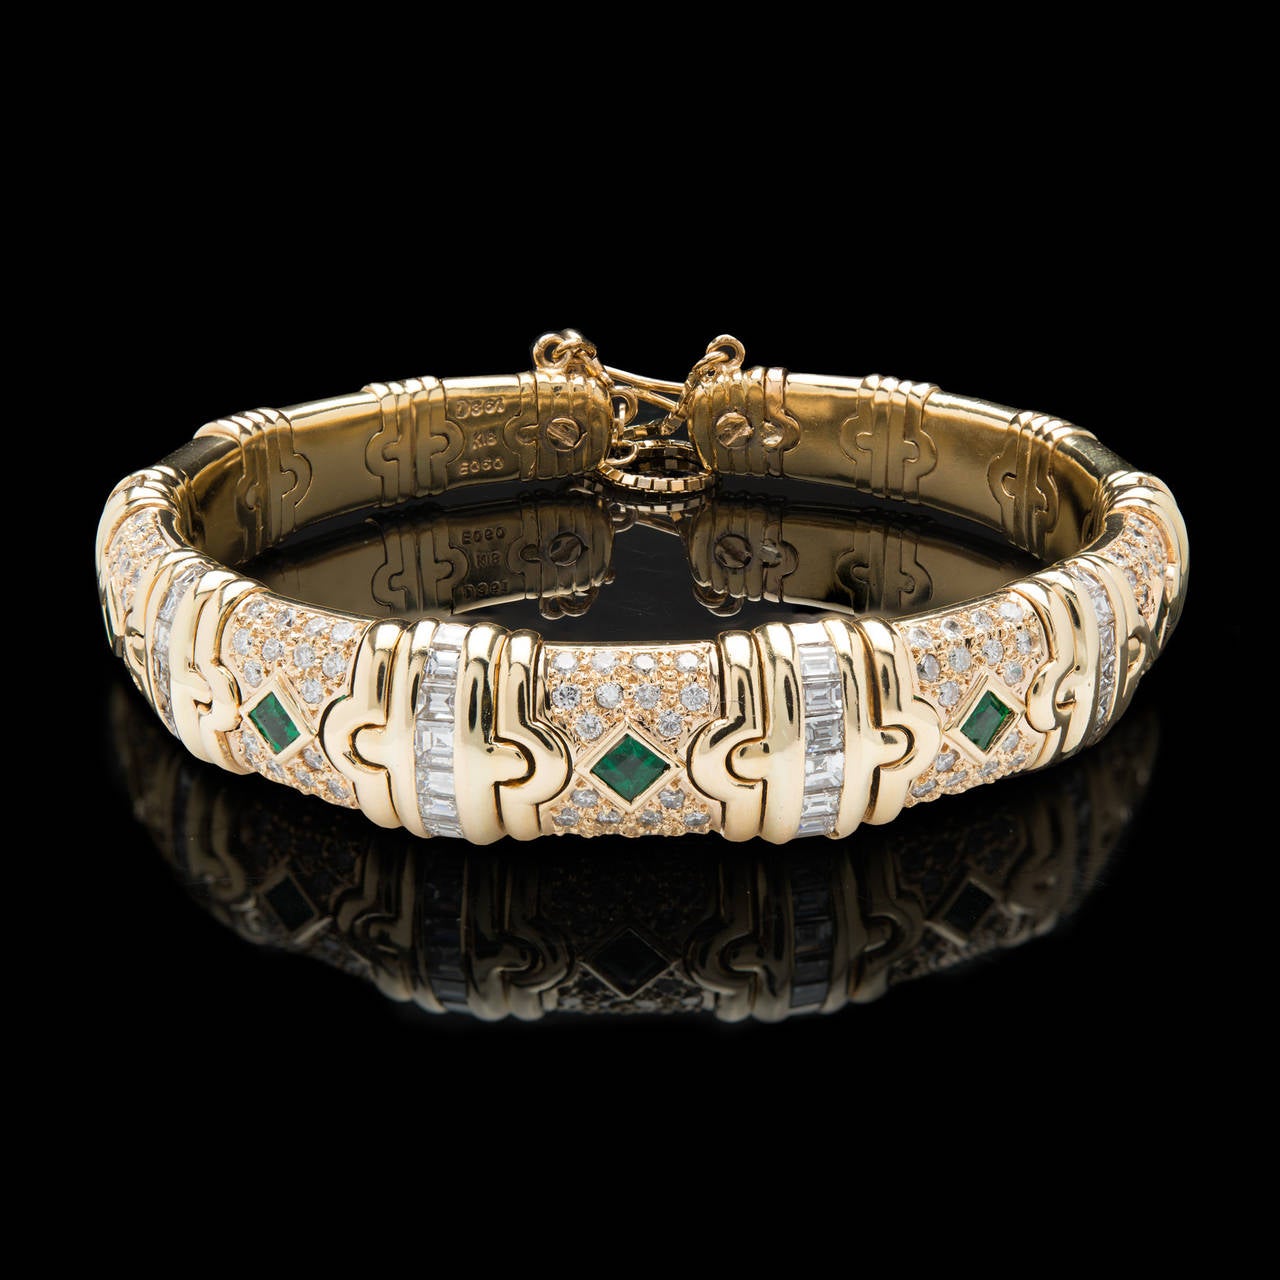 18Kt Yellow Gold Cuff Bracelet Features 5 Square Cut Emeralds totaling 0.60 carat total weight. Round brilliant & Asscher cut diamonds accent this piece with an approximate total of 3.61 carat weight. The bracelet measures 2.5 inches wide and 7